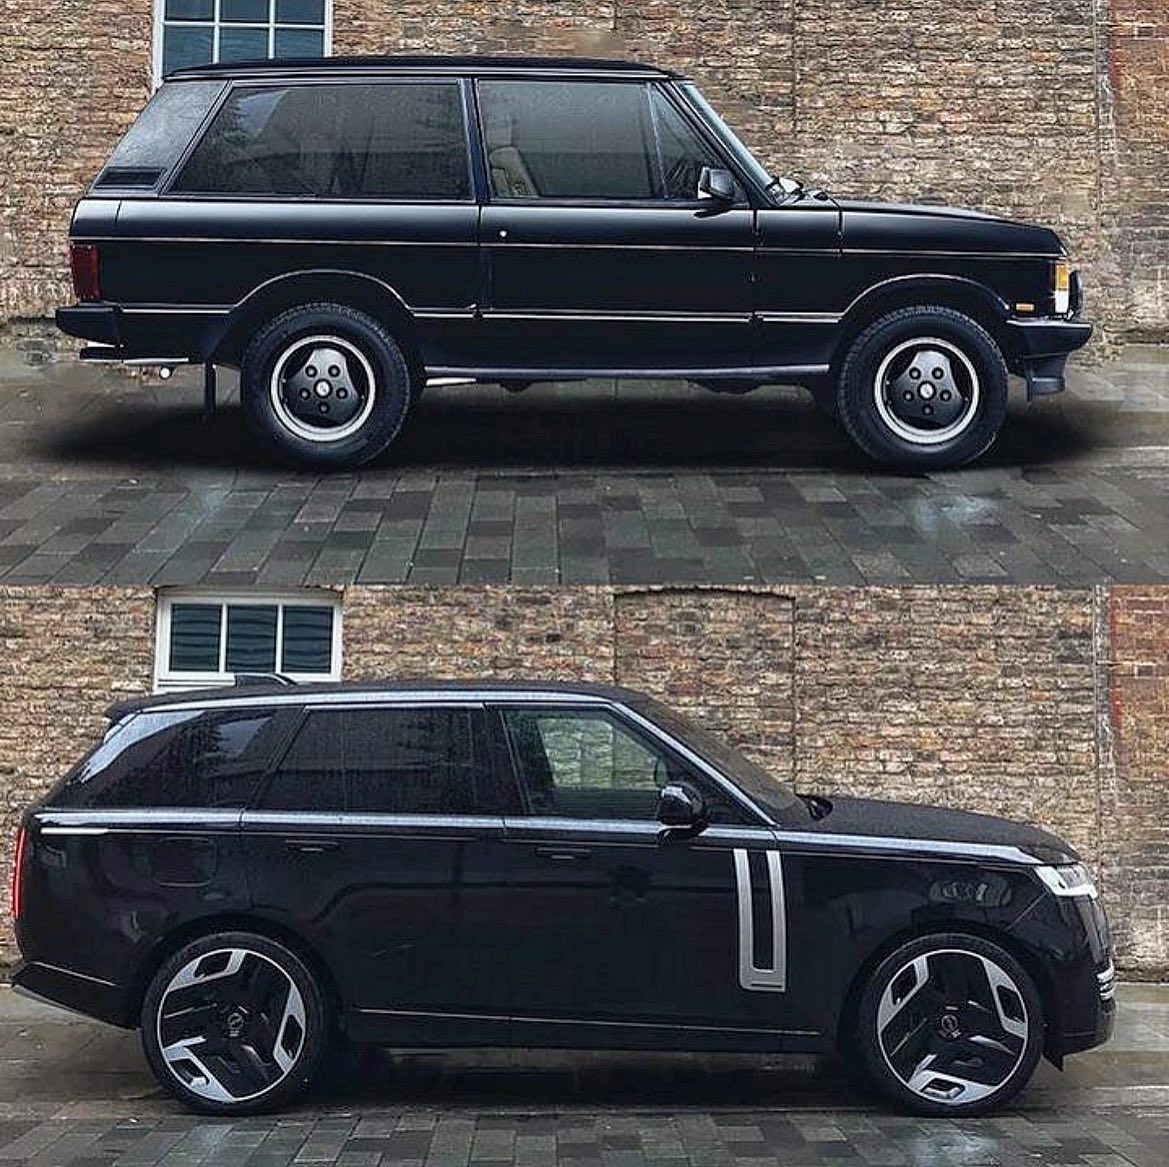 It’s come along way 🤔 

📸: @akahndesign 

#rangeroverworld #rangeroversociety #rangeroverusa #rangerovervideos #rangerover #rangeroversport #4x4 #rangeroveruae #rrs #landrover #glohh #rangeroversupercharged #rangerovervogue #rangeroverevoque #landroverphotos #glohh #velar